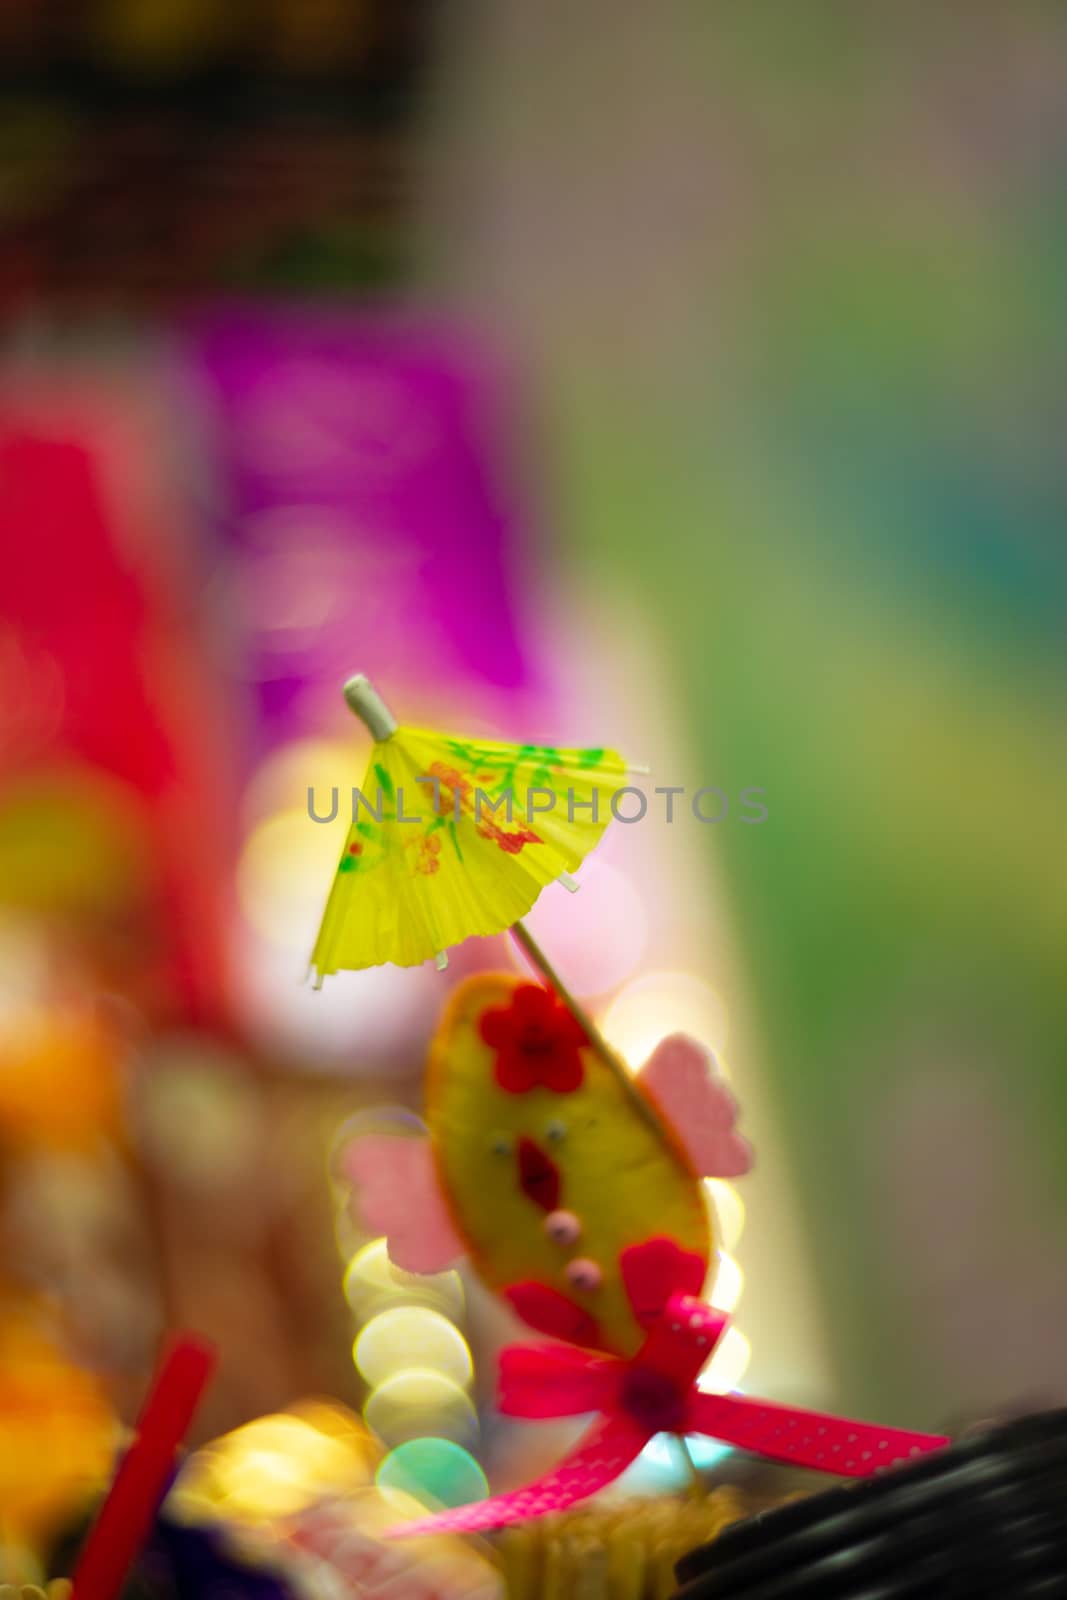 Yellow cocktail paper umbrella on colorful blurred defocused background.